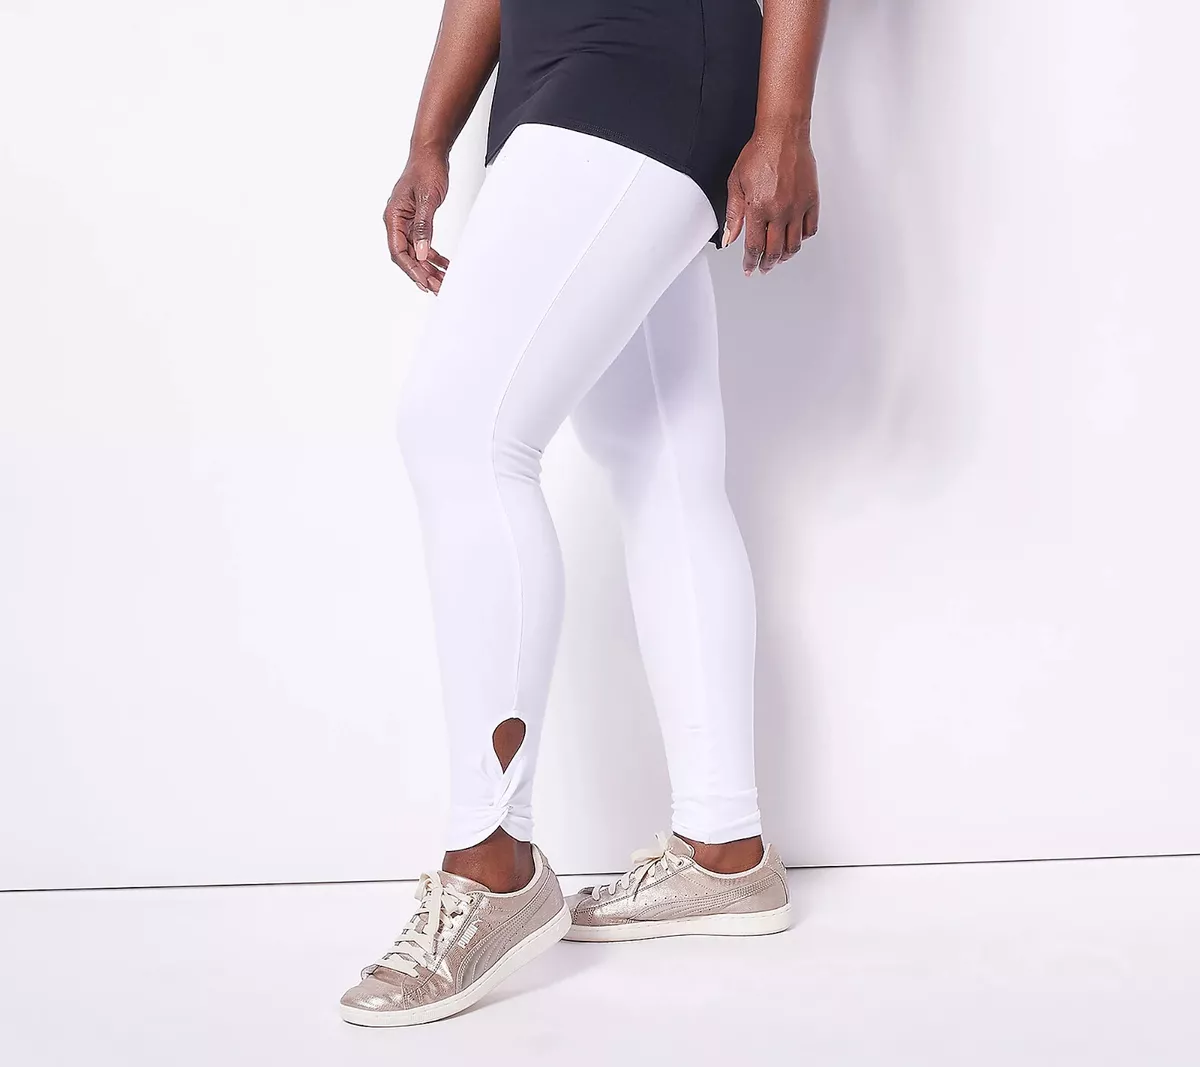 Women with Control Tummy Control Legging with Twist at Ankle (White, XL)  A489365